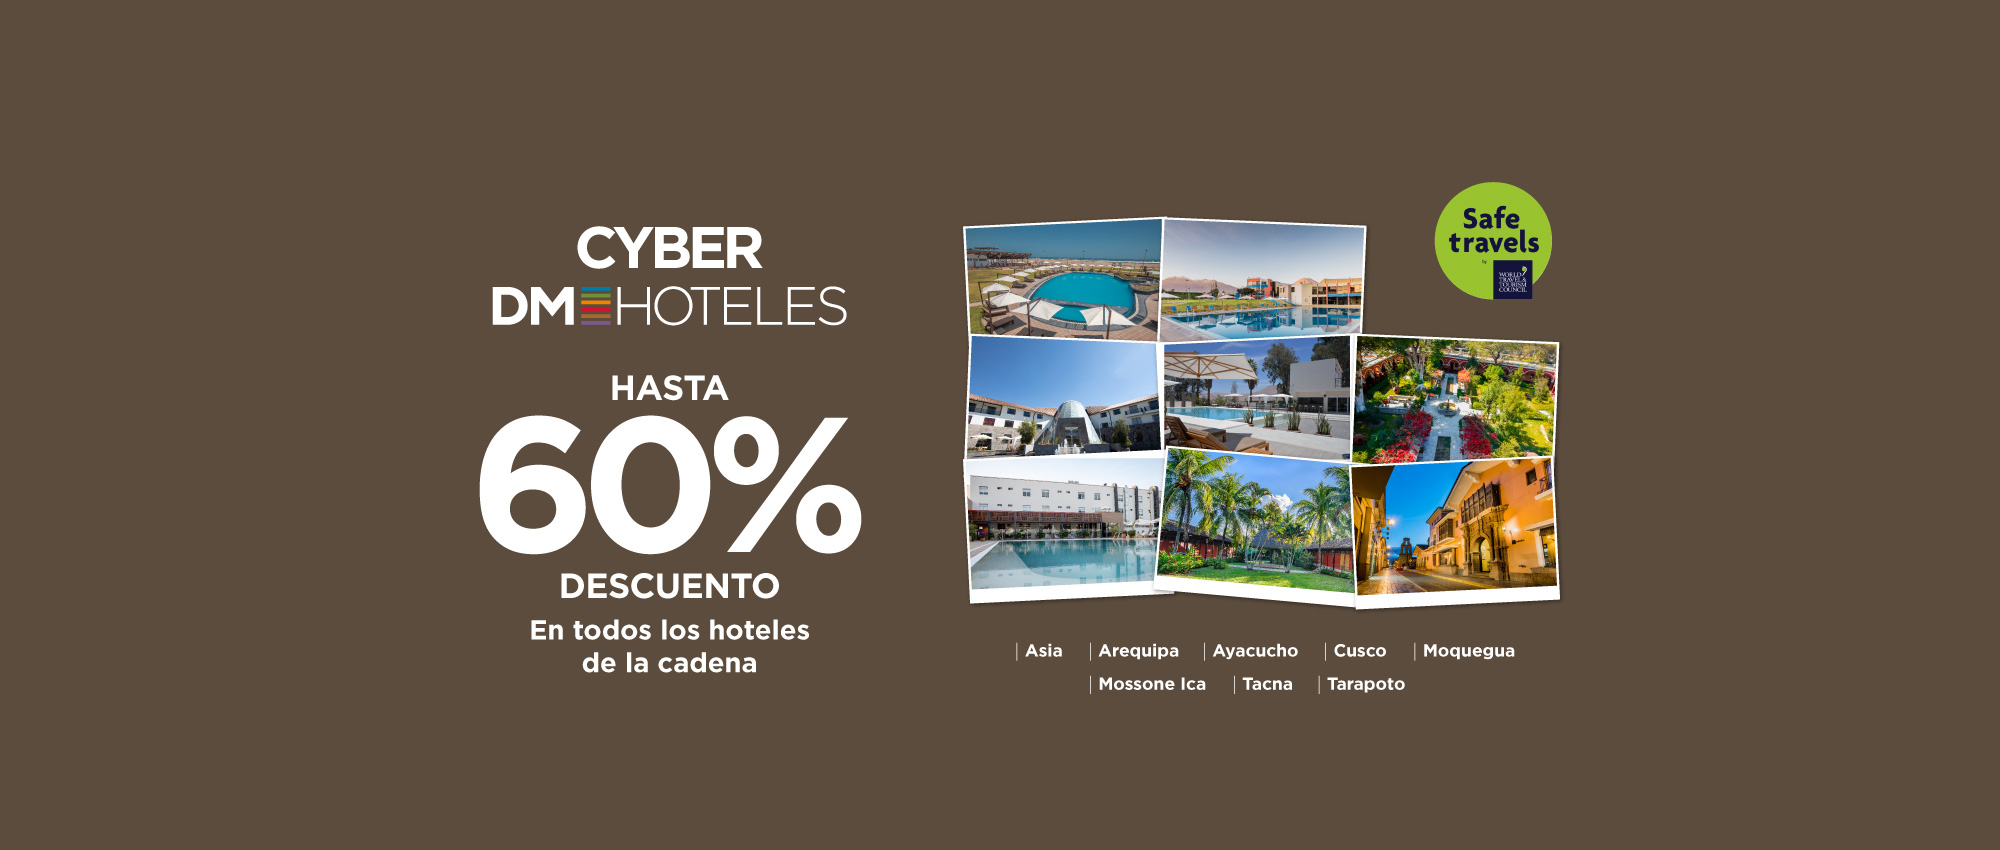 dm-hoteles-cyber-day-promocion-banner-web